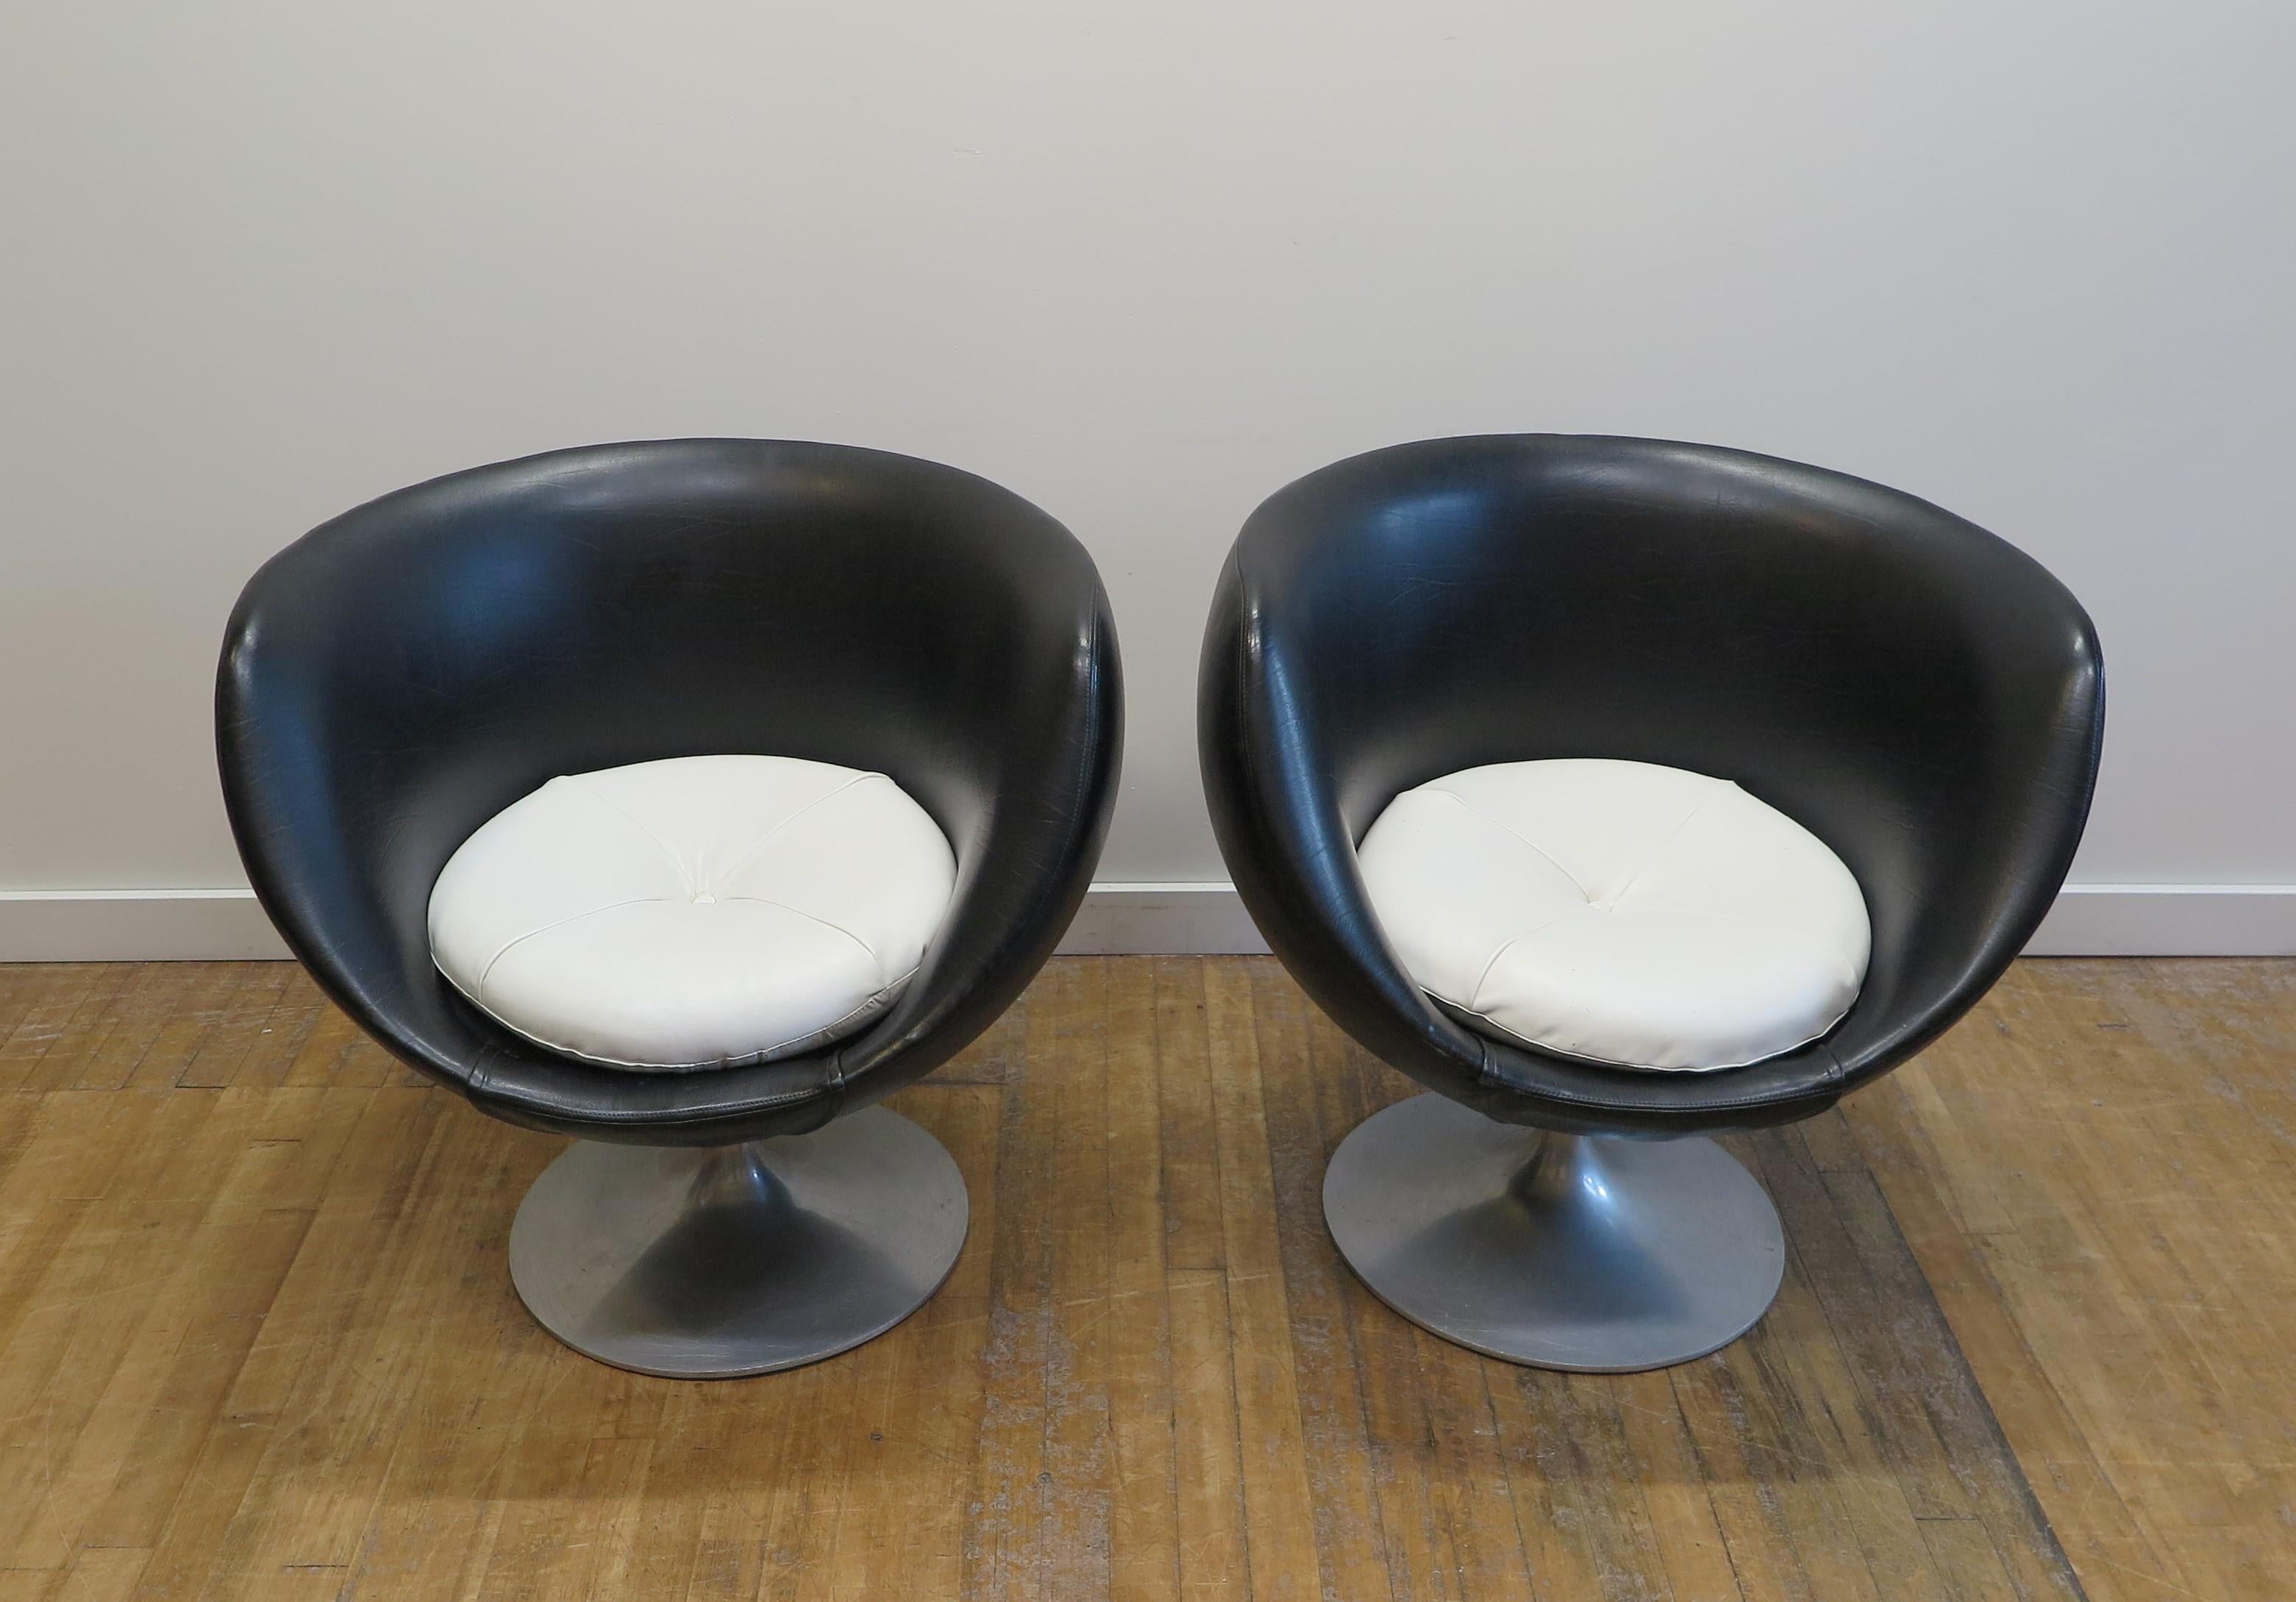 Pair of Overman Pod Chairs. Rare early tulip base swivel pod chairs by Overman. Overman Swivel Pod chairs with the early tulip style base. In good original condition can be used as is. In black leatherette with white leatherette cushions. Some small